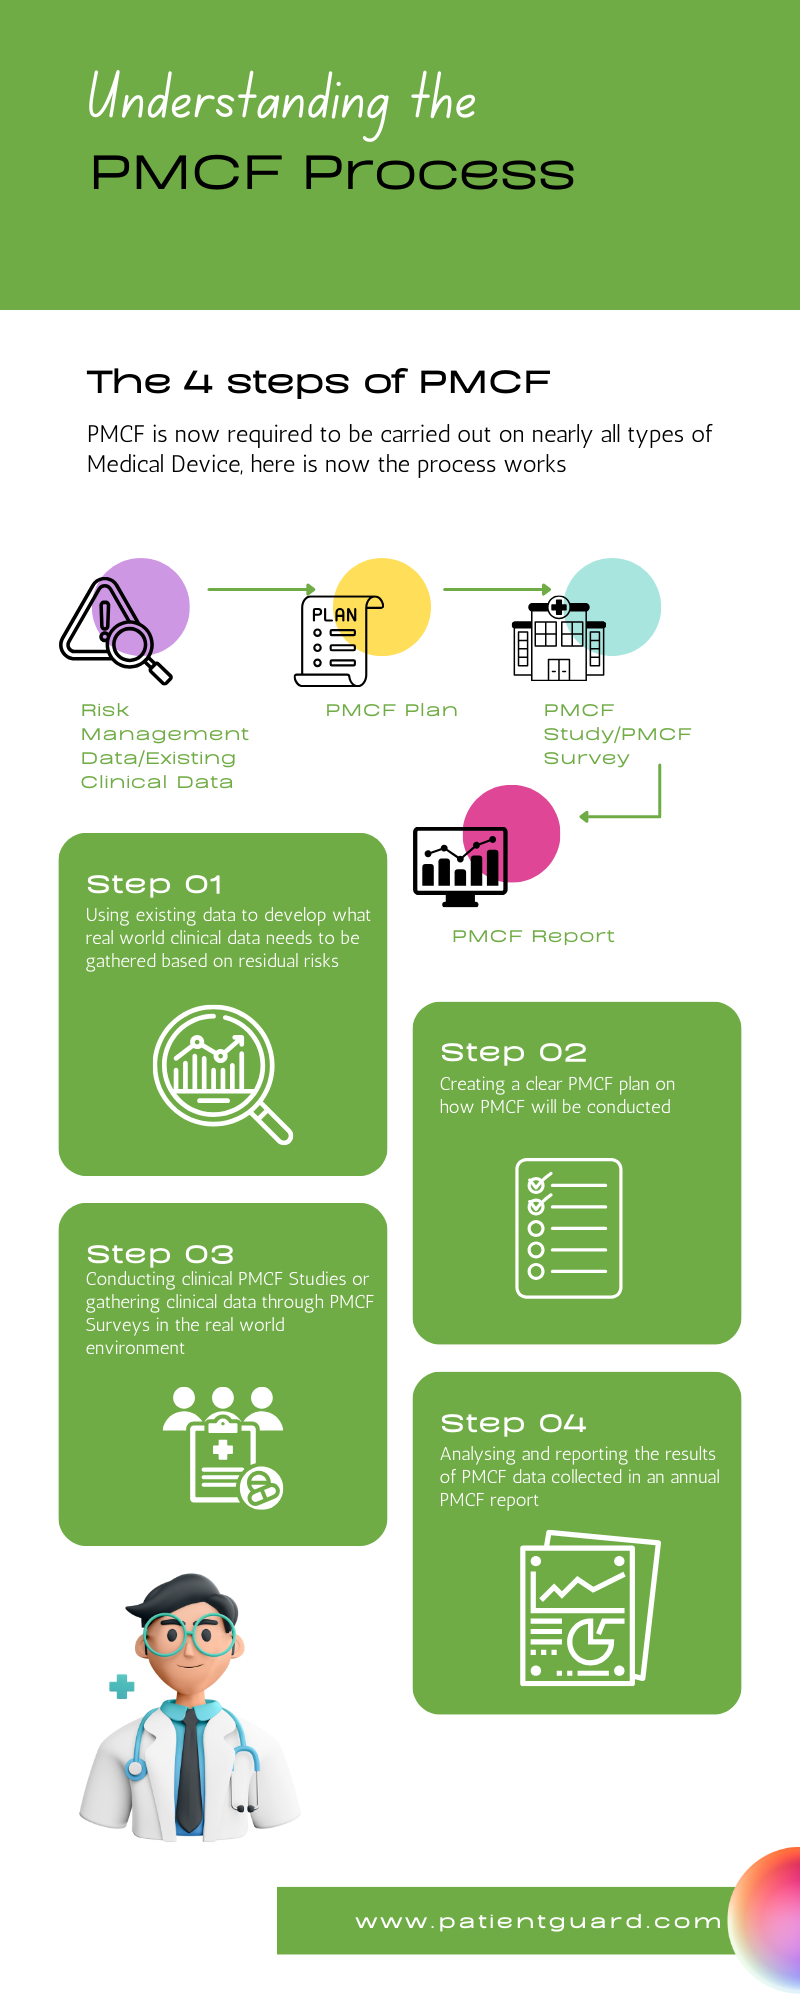 Info graphic showing the 4 steps involved in performing PMCF